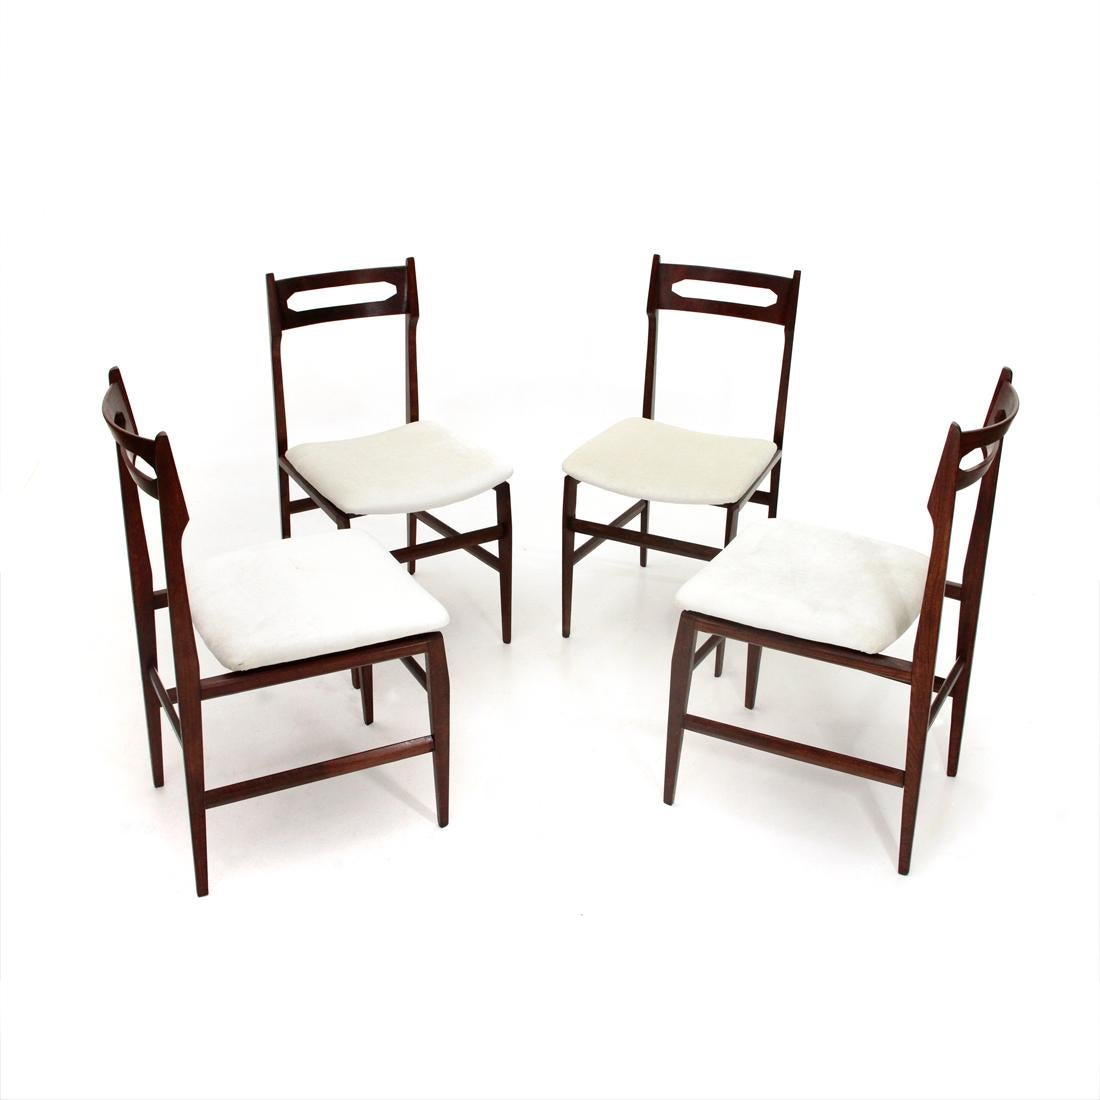 4 chairs of Italian manufacture produced in the 1950s.
Solid wood frame with faceted tapered edges.
Back in curved plywood.
Padded seat lined with new white velvet fabric.
Good general conditions, some signs due to normal use over